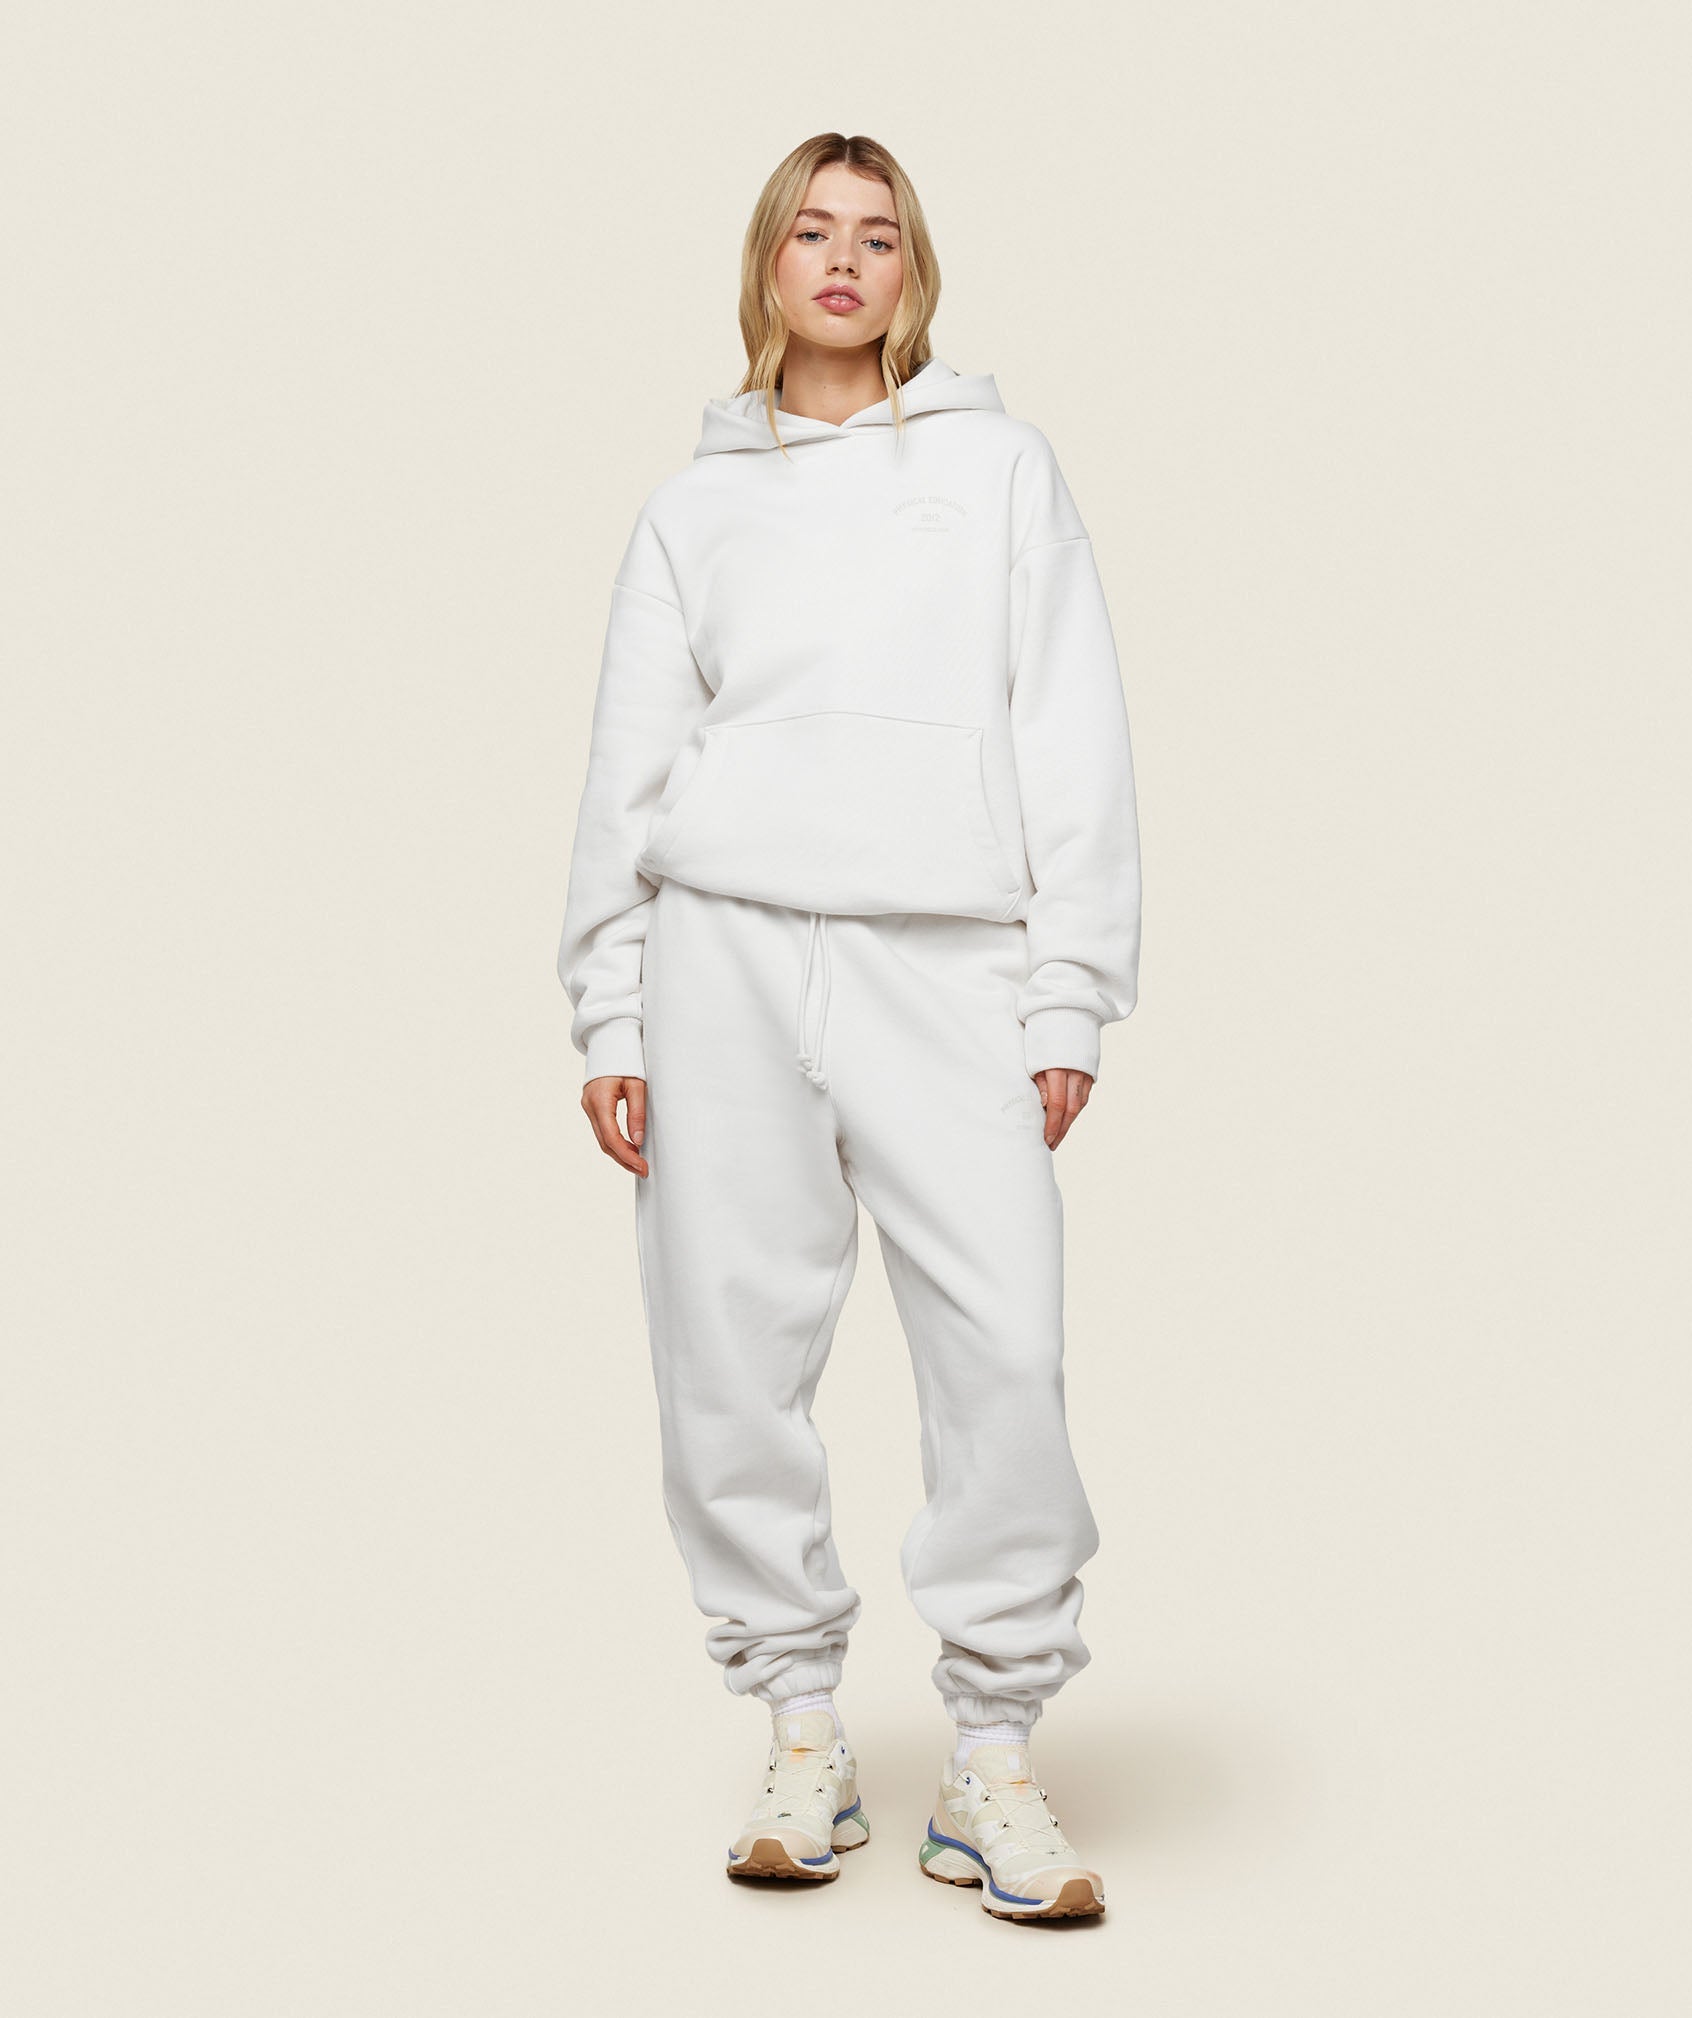 Phys Ed Graphic Hoodie in Ecru White - view 4